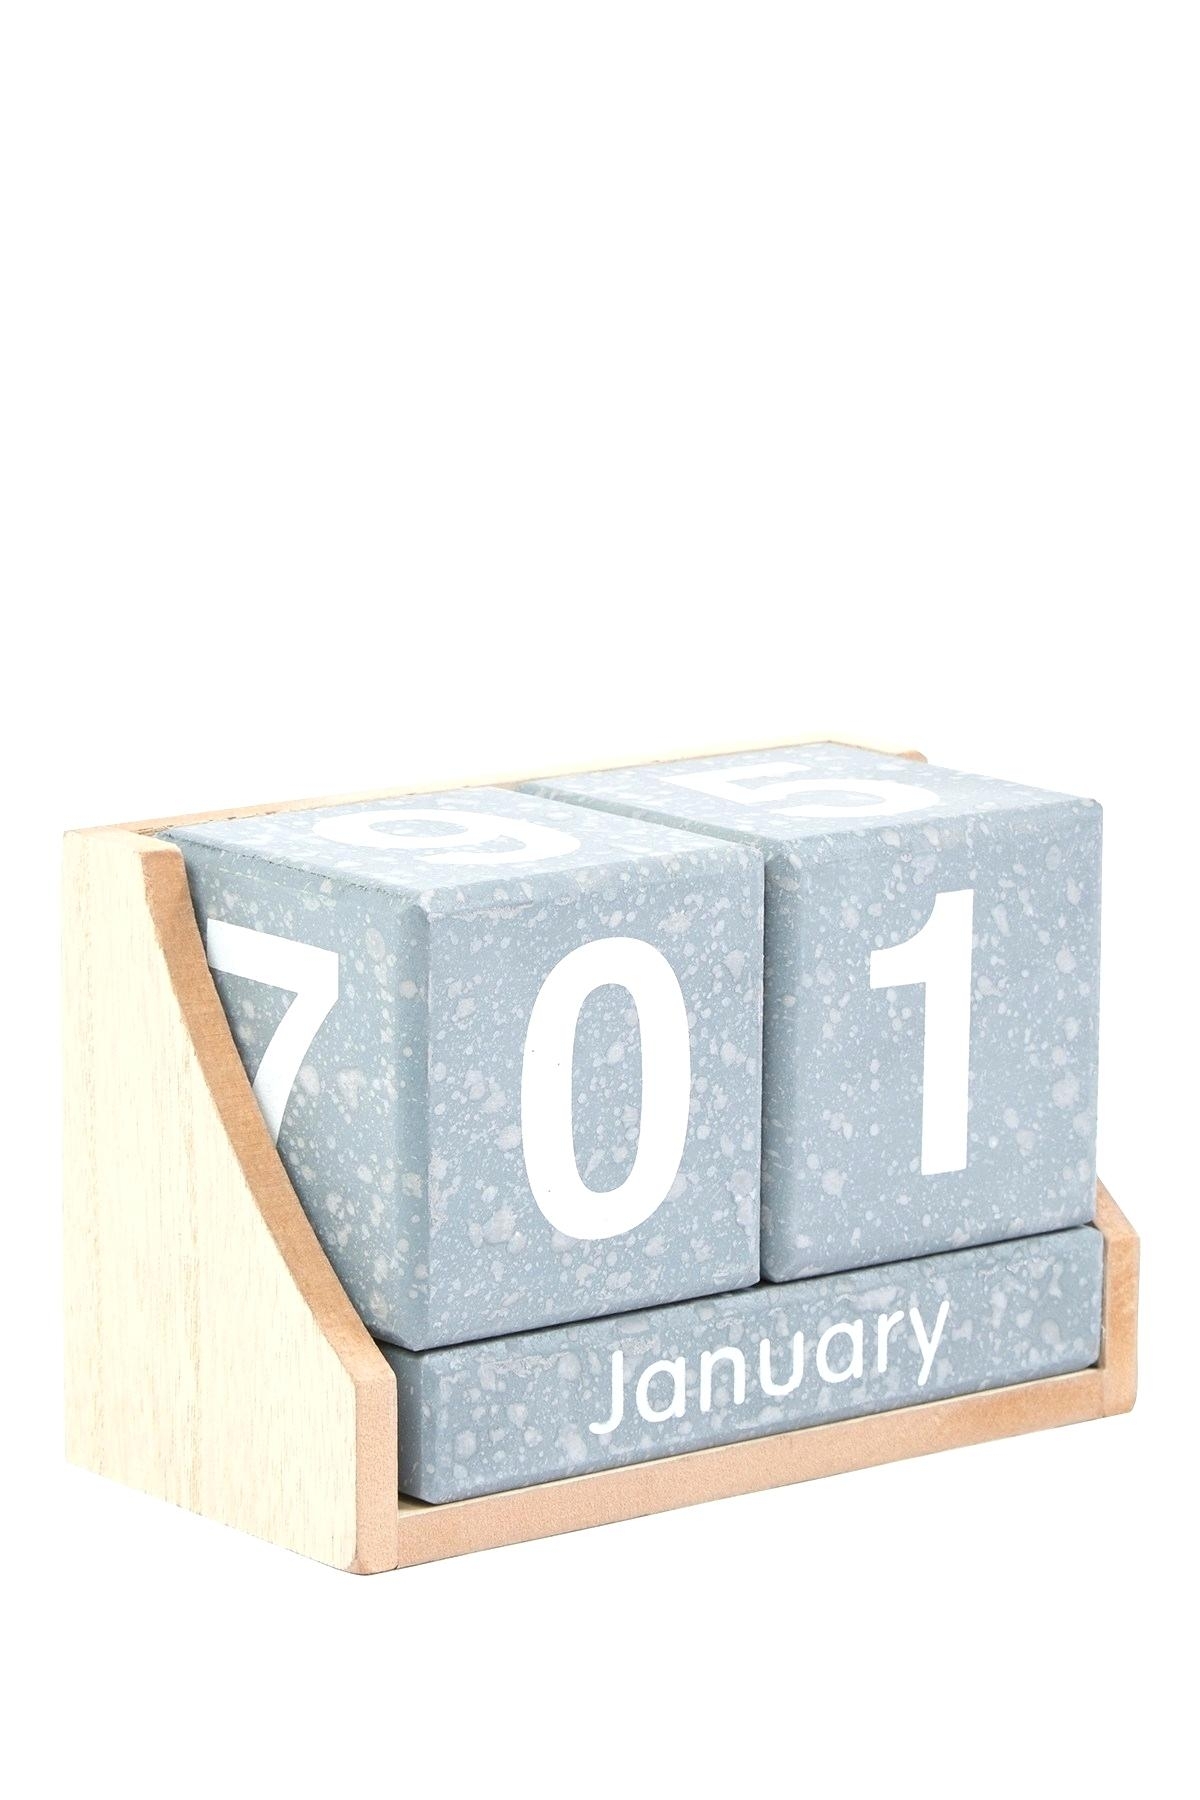 Wooden Calendar Unique Frame Plans How To Make Blocks Wall Hanger with Wall Calendar Frames And Holders